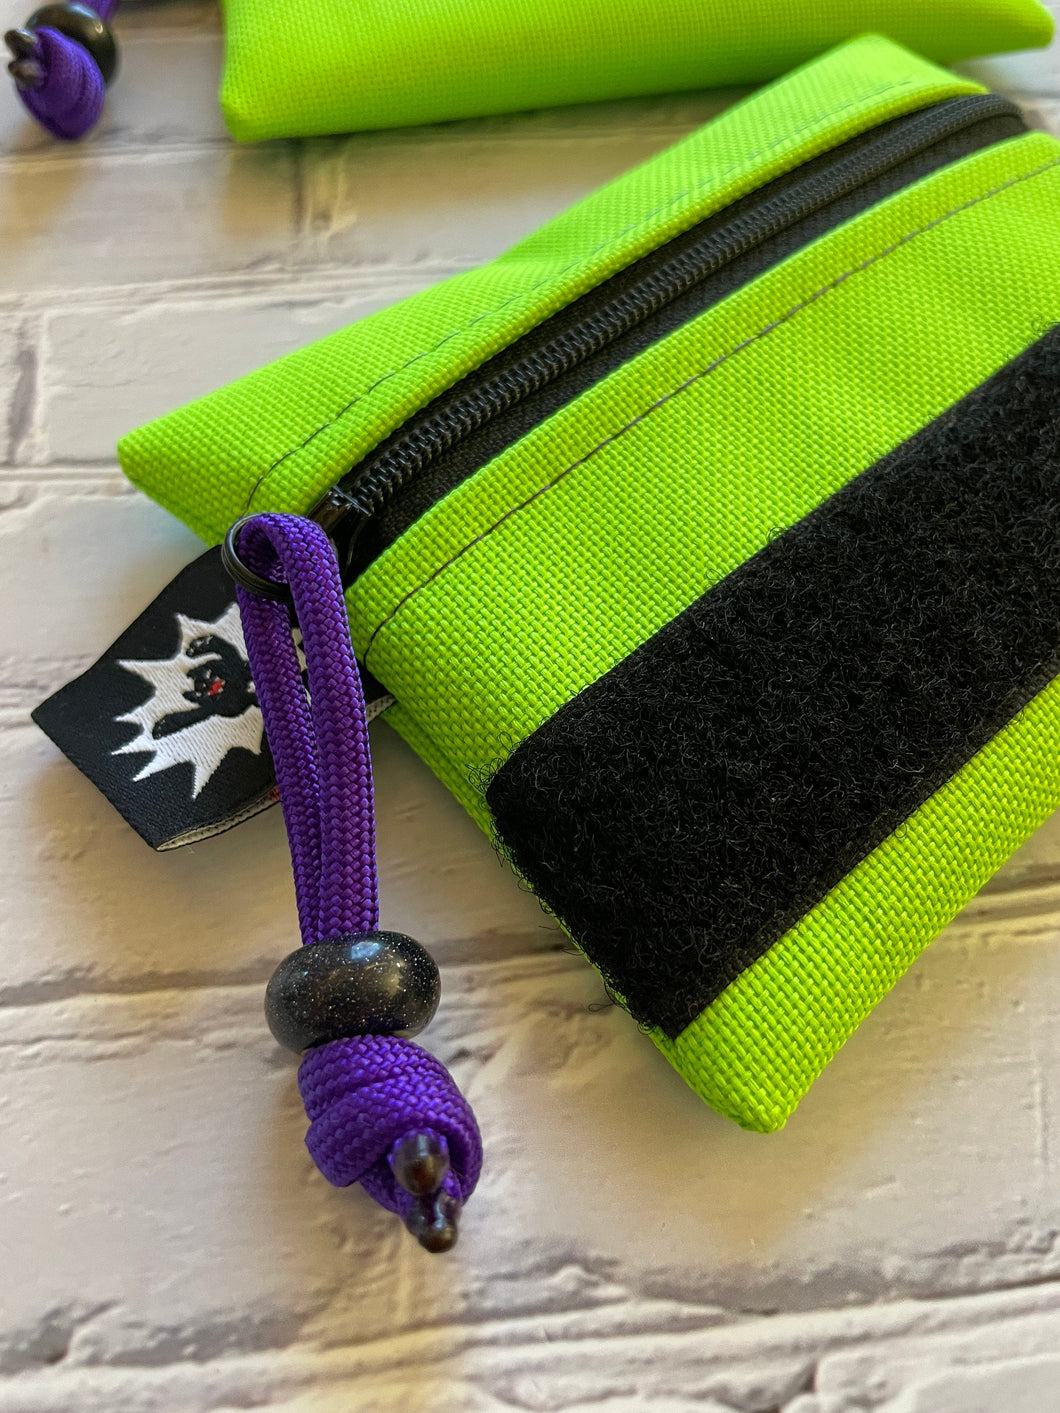 EDC Pouch | Mini Pouch | Small Zipper Wallet | Everyday Carry Bag | Hook and Loop Pouch | EDC Gear | Tactical Kit Lime Green Purple